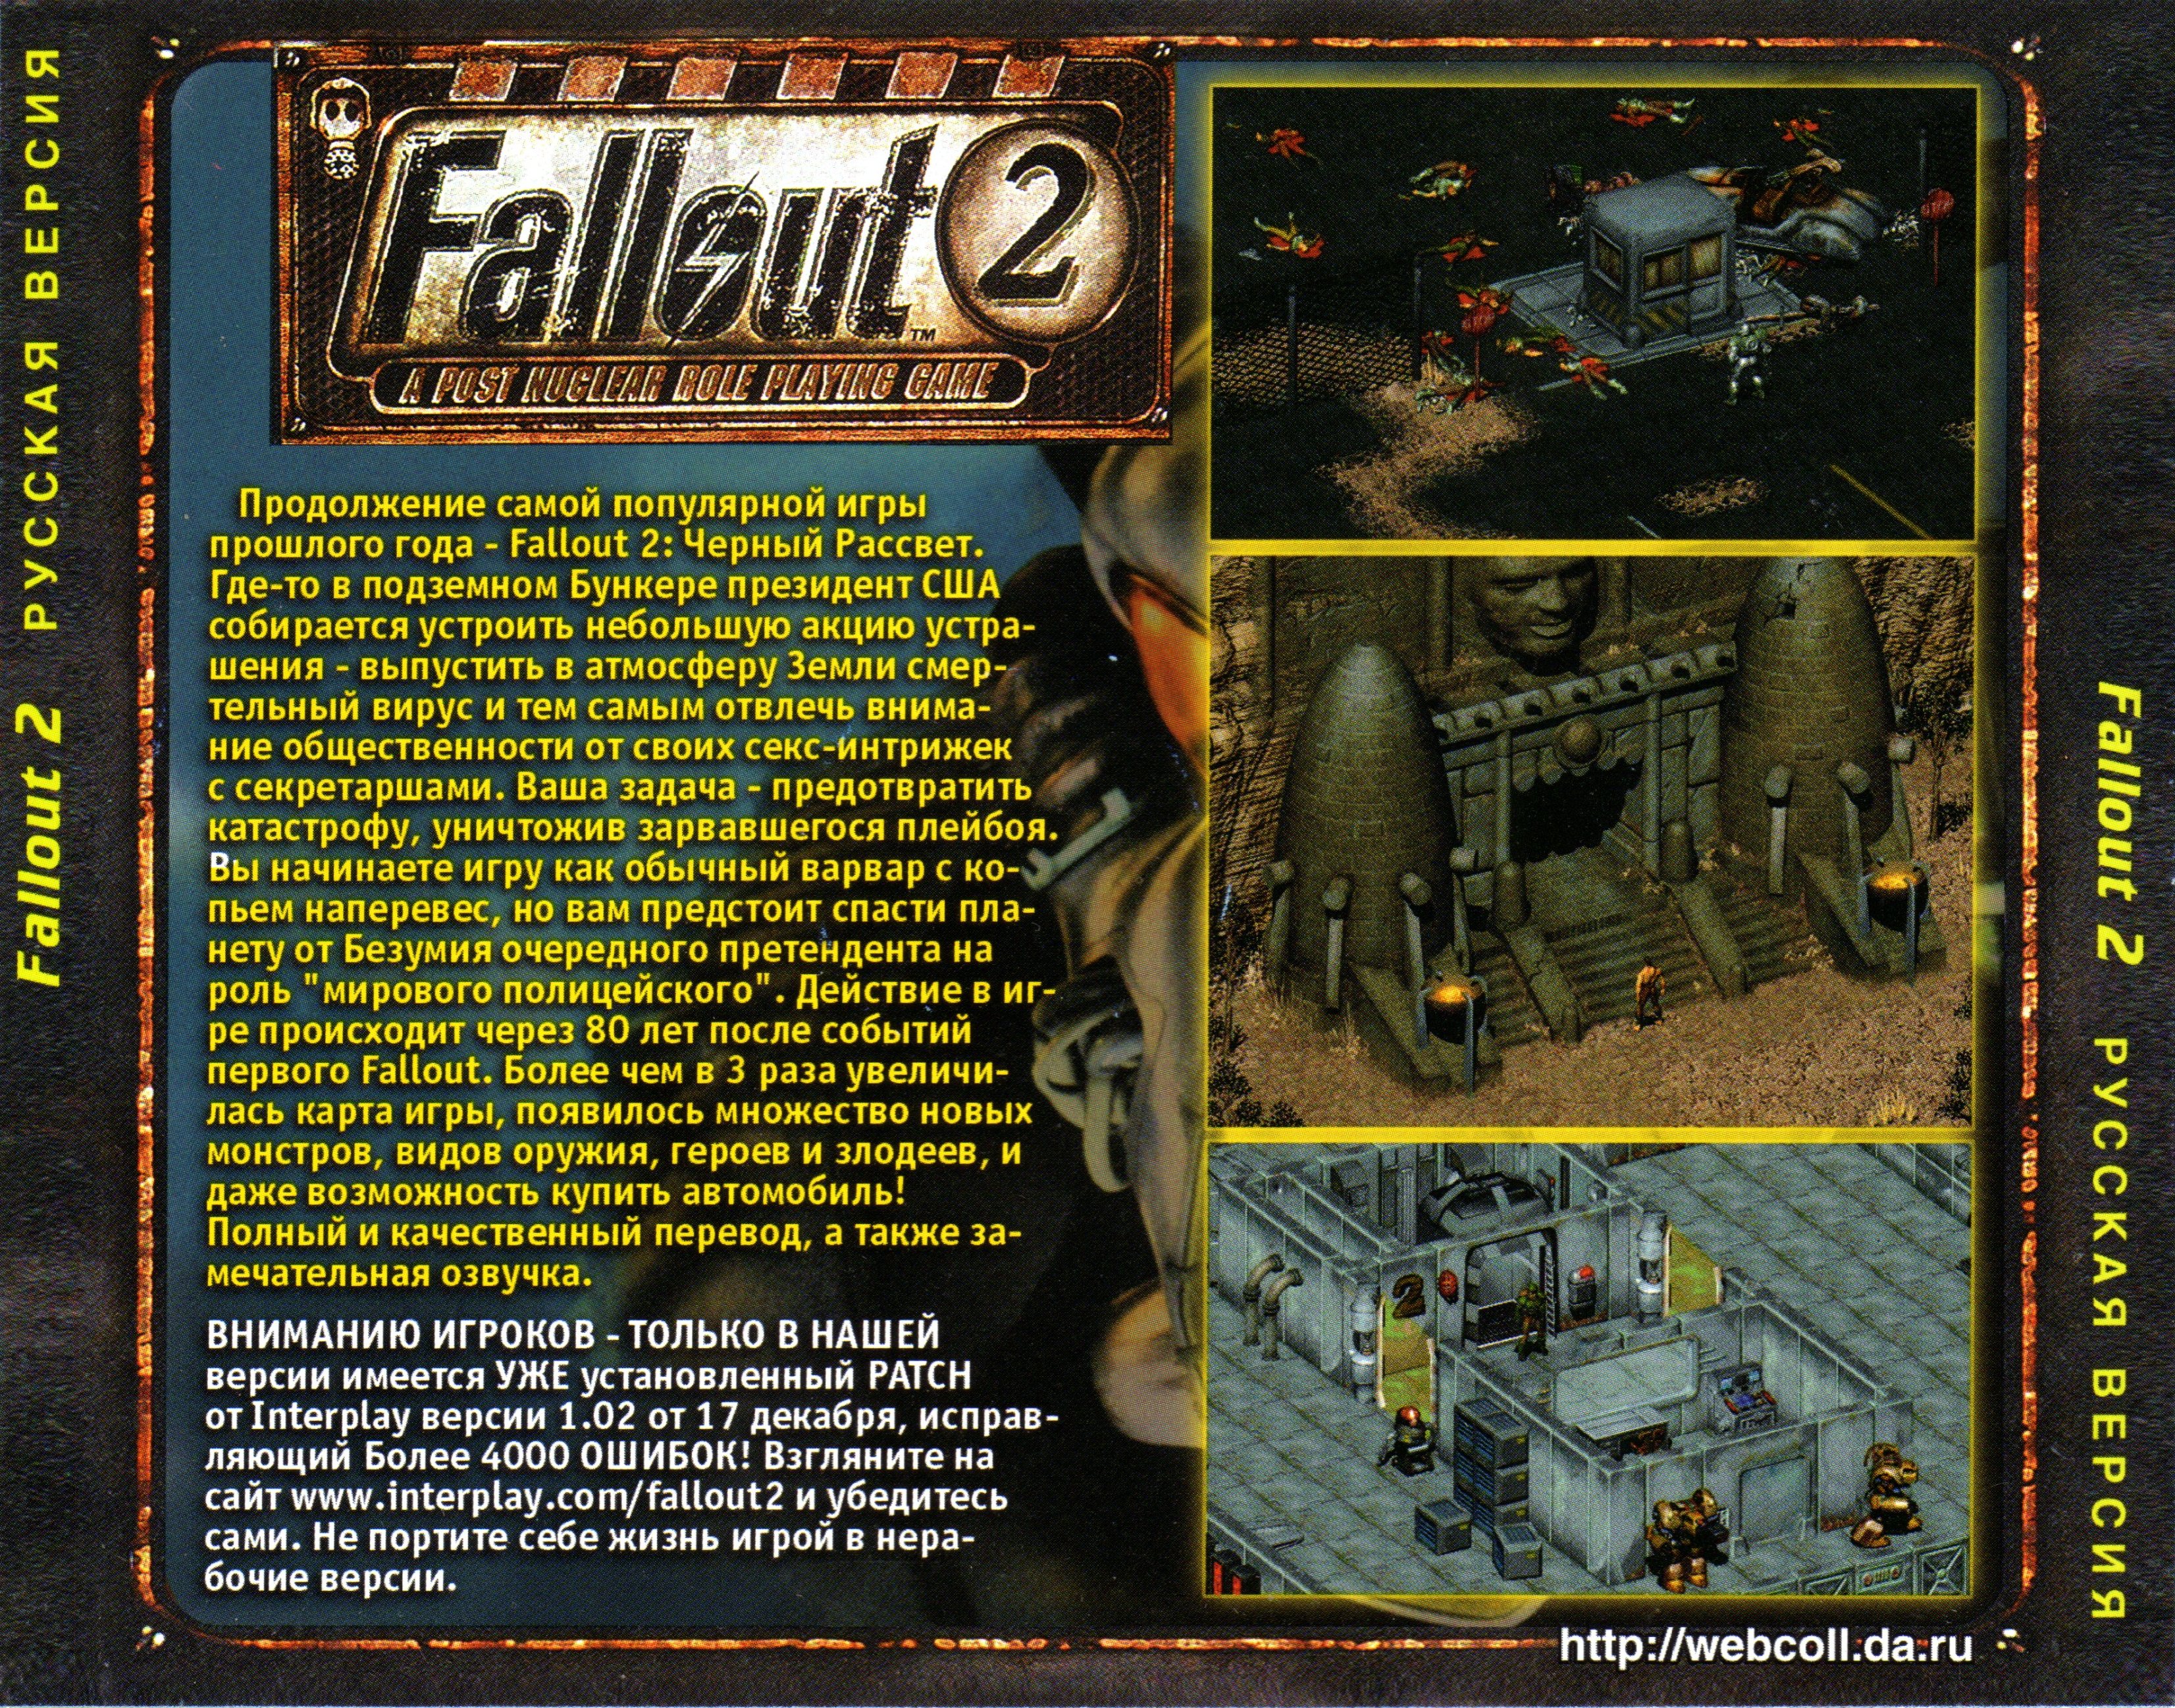 Fallout какой год в игре. Фоллаут 2 Фаргус диск. Fallout 2 обложка. Fallout 2 обложка игры. Fallout 2 1998.